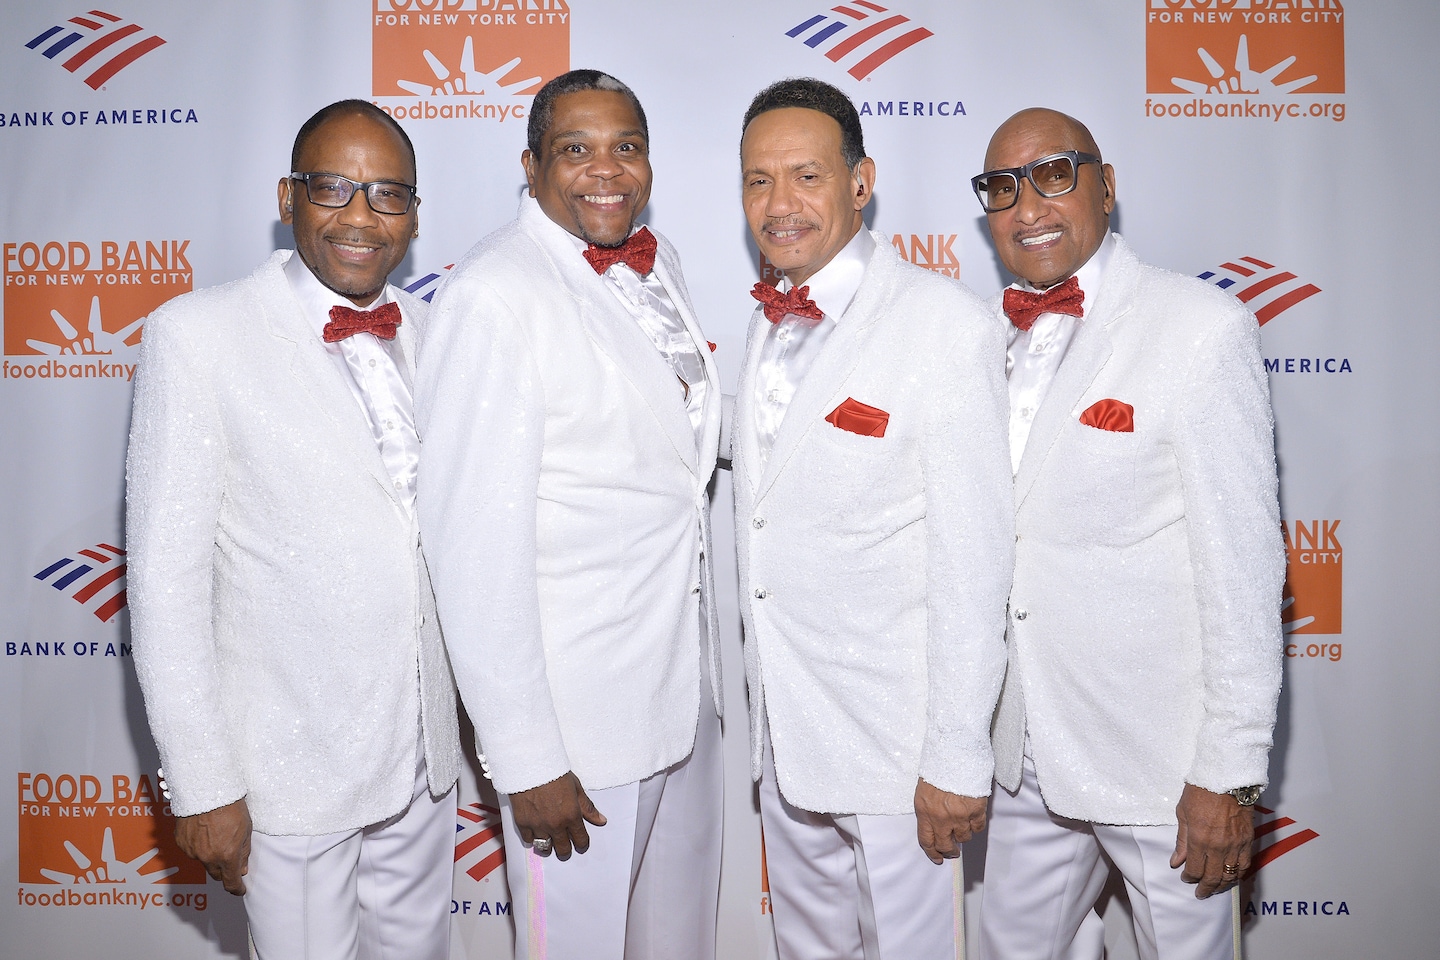 Four Tops singer accuses hospital of racism, putting him in straitjacket